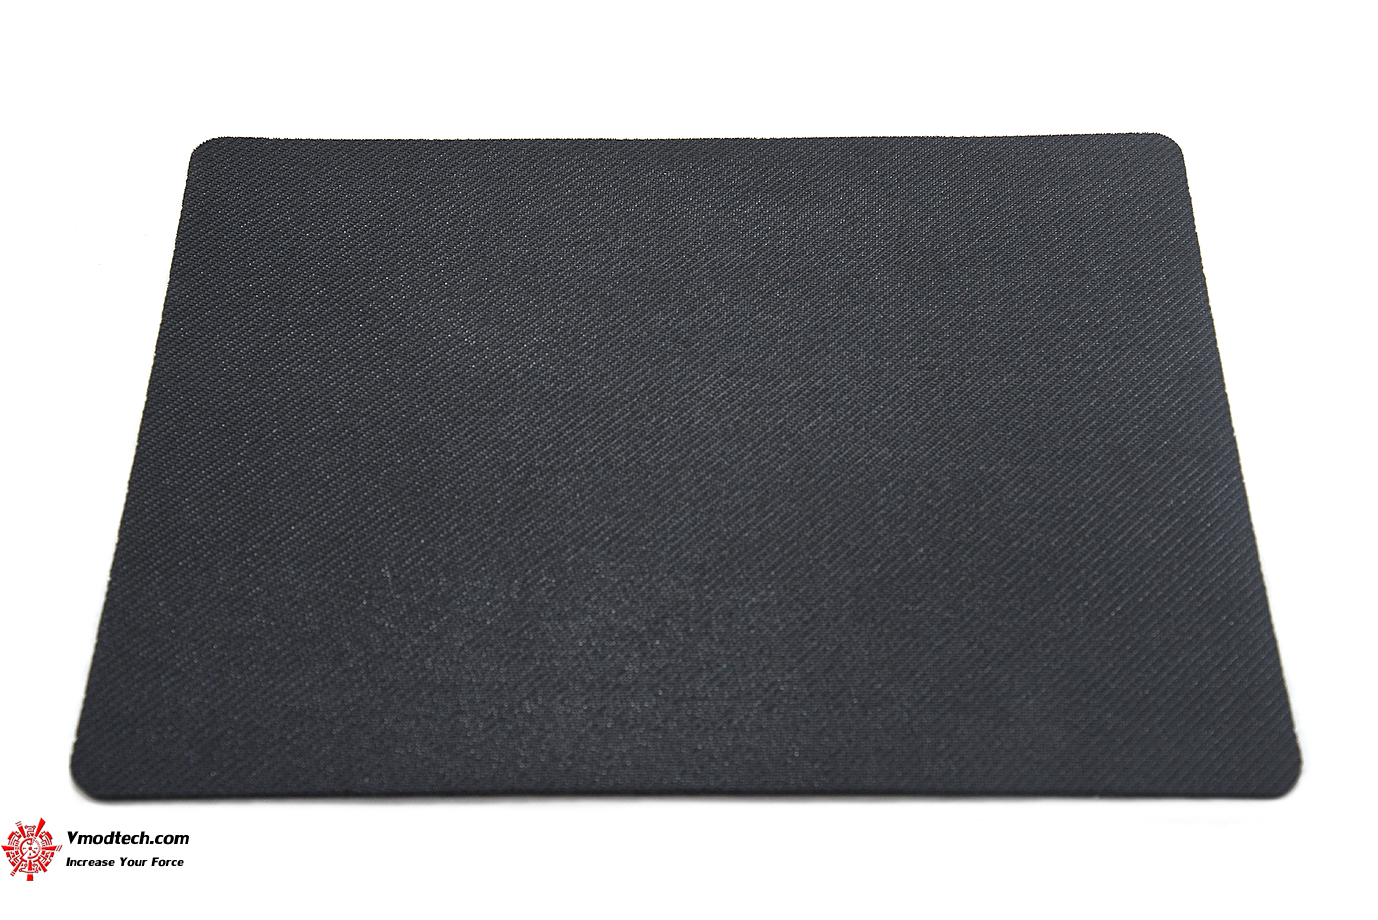 dsc 5063 MSI AGILITY GD20 GAMING MOUSEPAD REVIEW